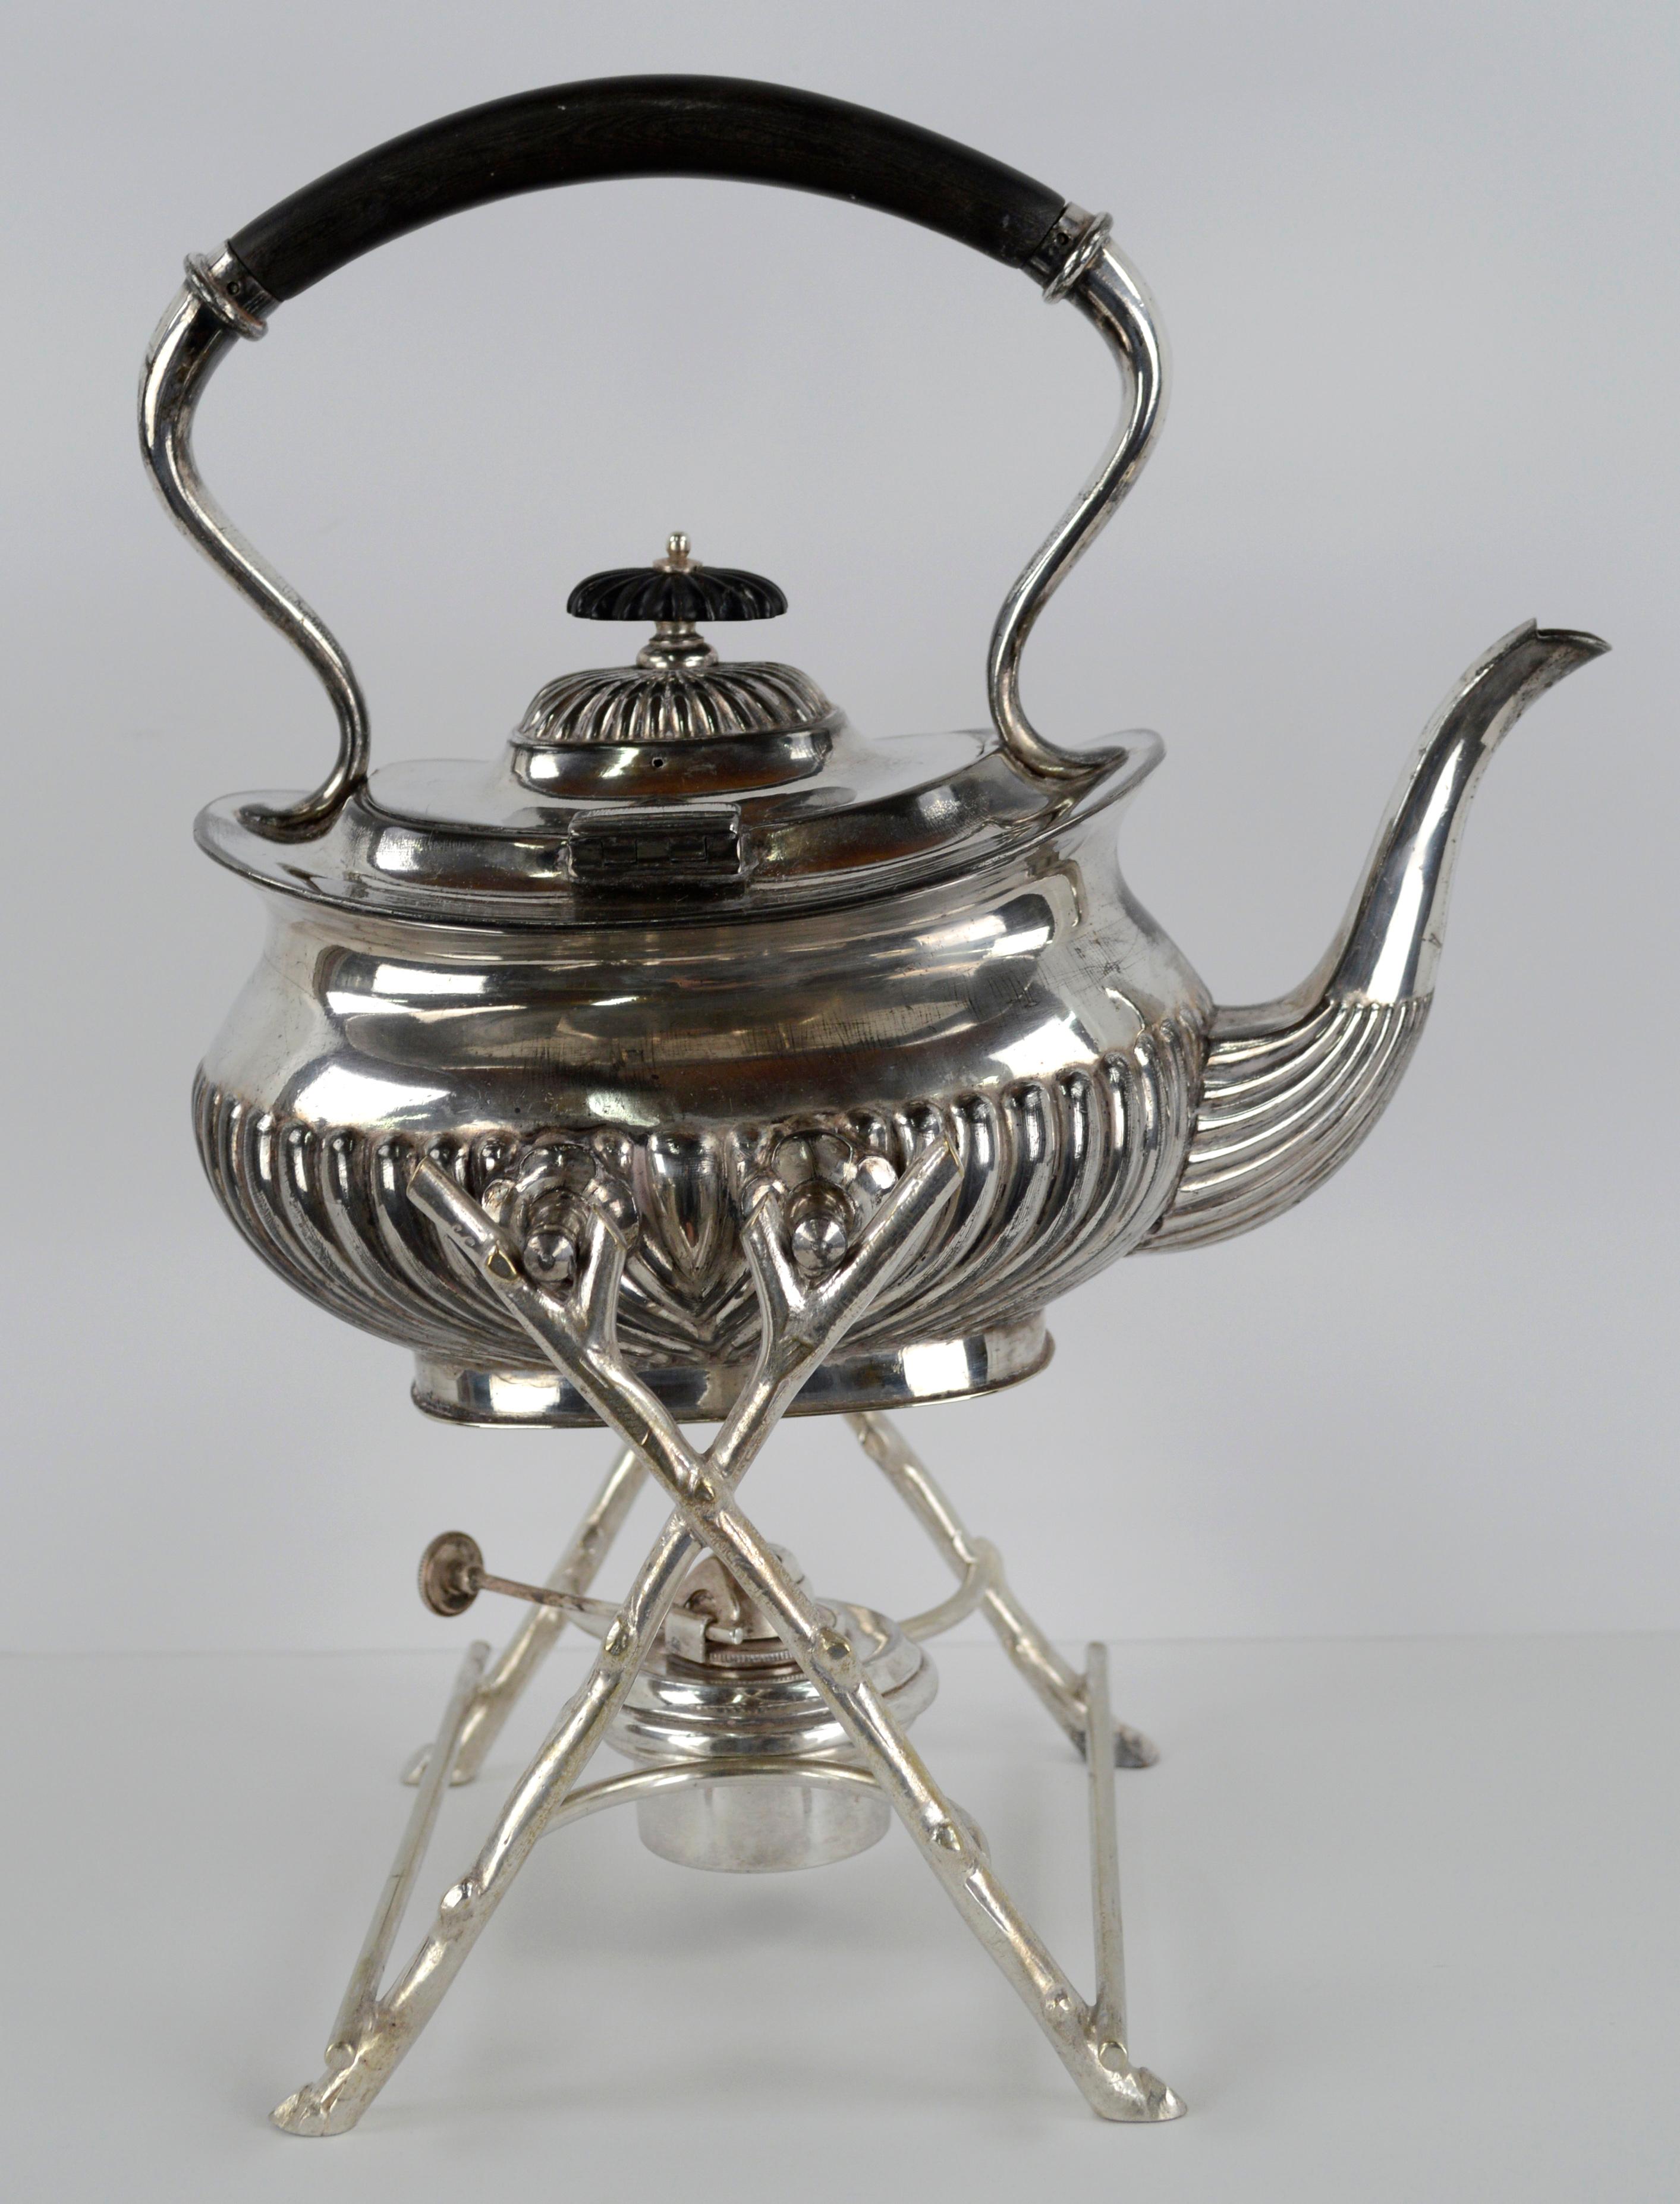 Richard Richardson Sheffield Edwardian Silverplate Tilting Spirit Kettle/Teapot

Early 20th Century Edwardian tilting silver-plated teapot on stand with warmer, also known as a spirit kettle, by Sheffield silversmith Richard Richardson (English,